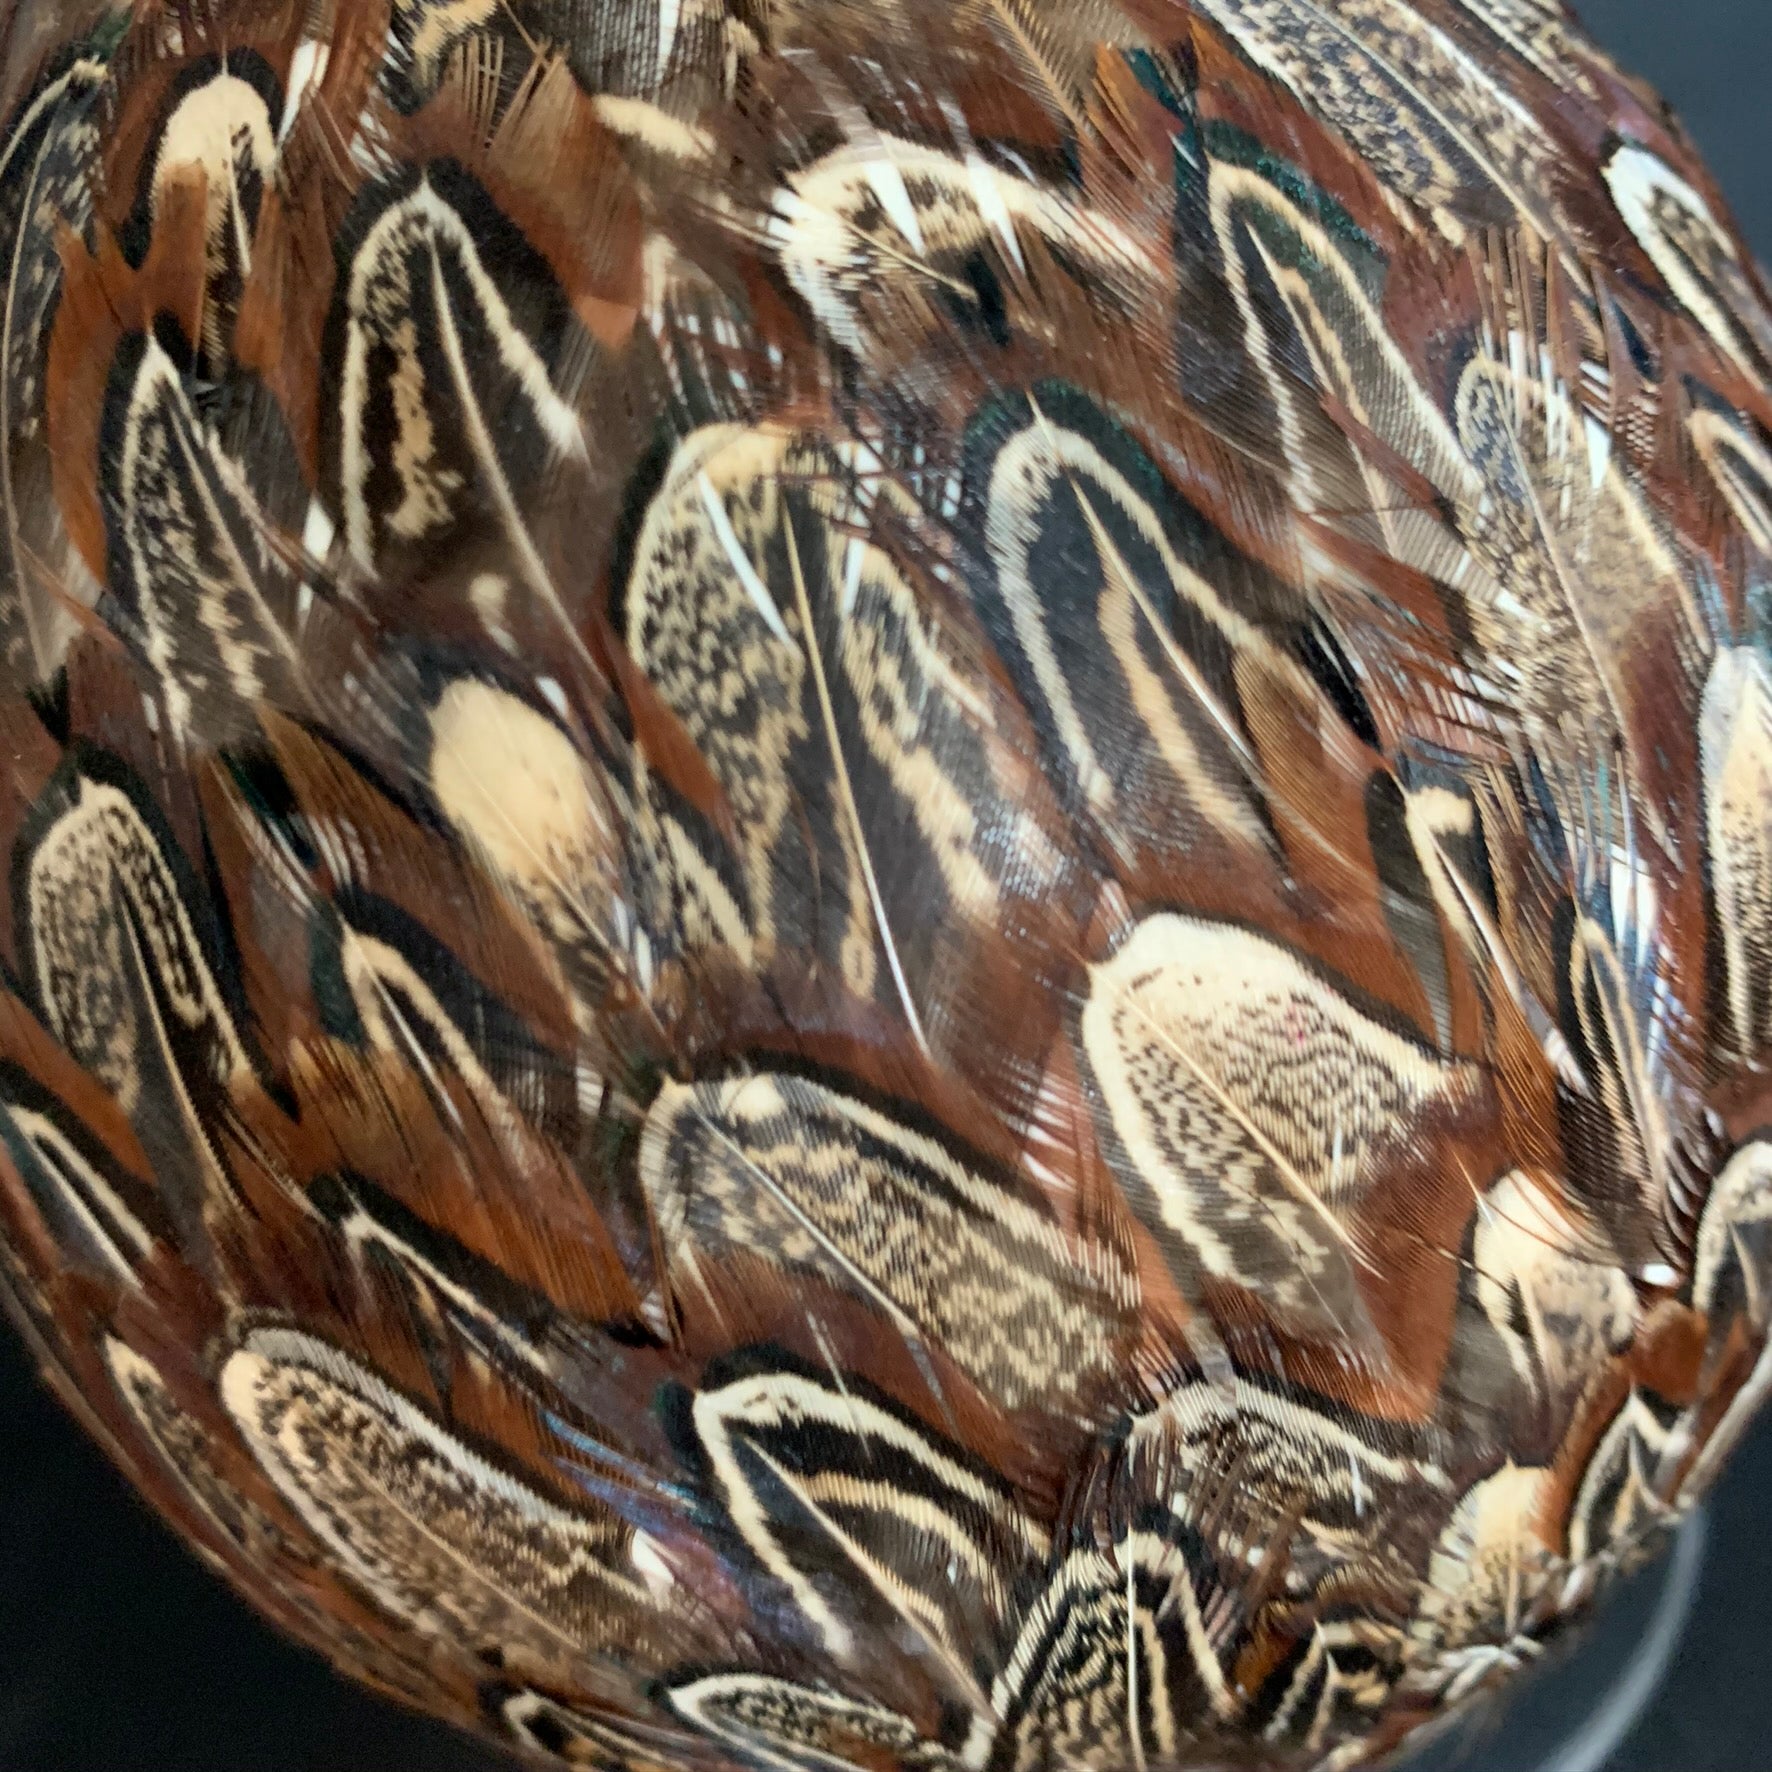 Ostrich egg decorated all around with real wild pheasant feathers